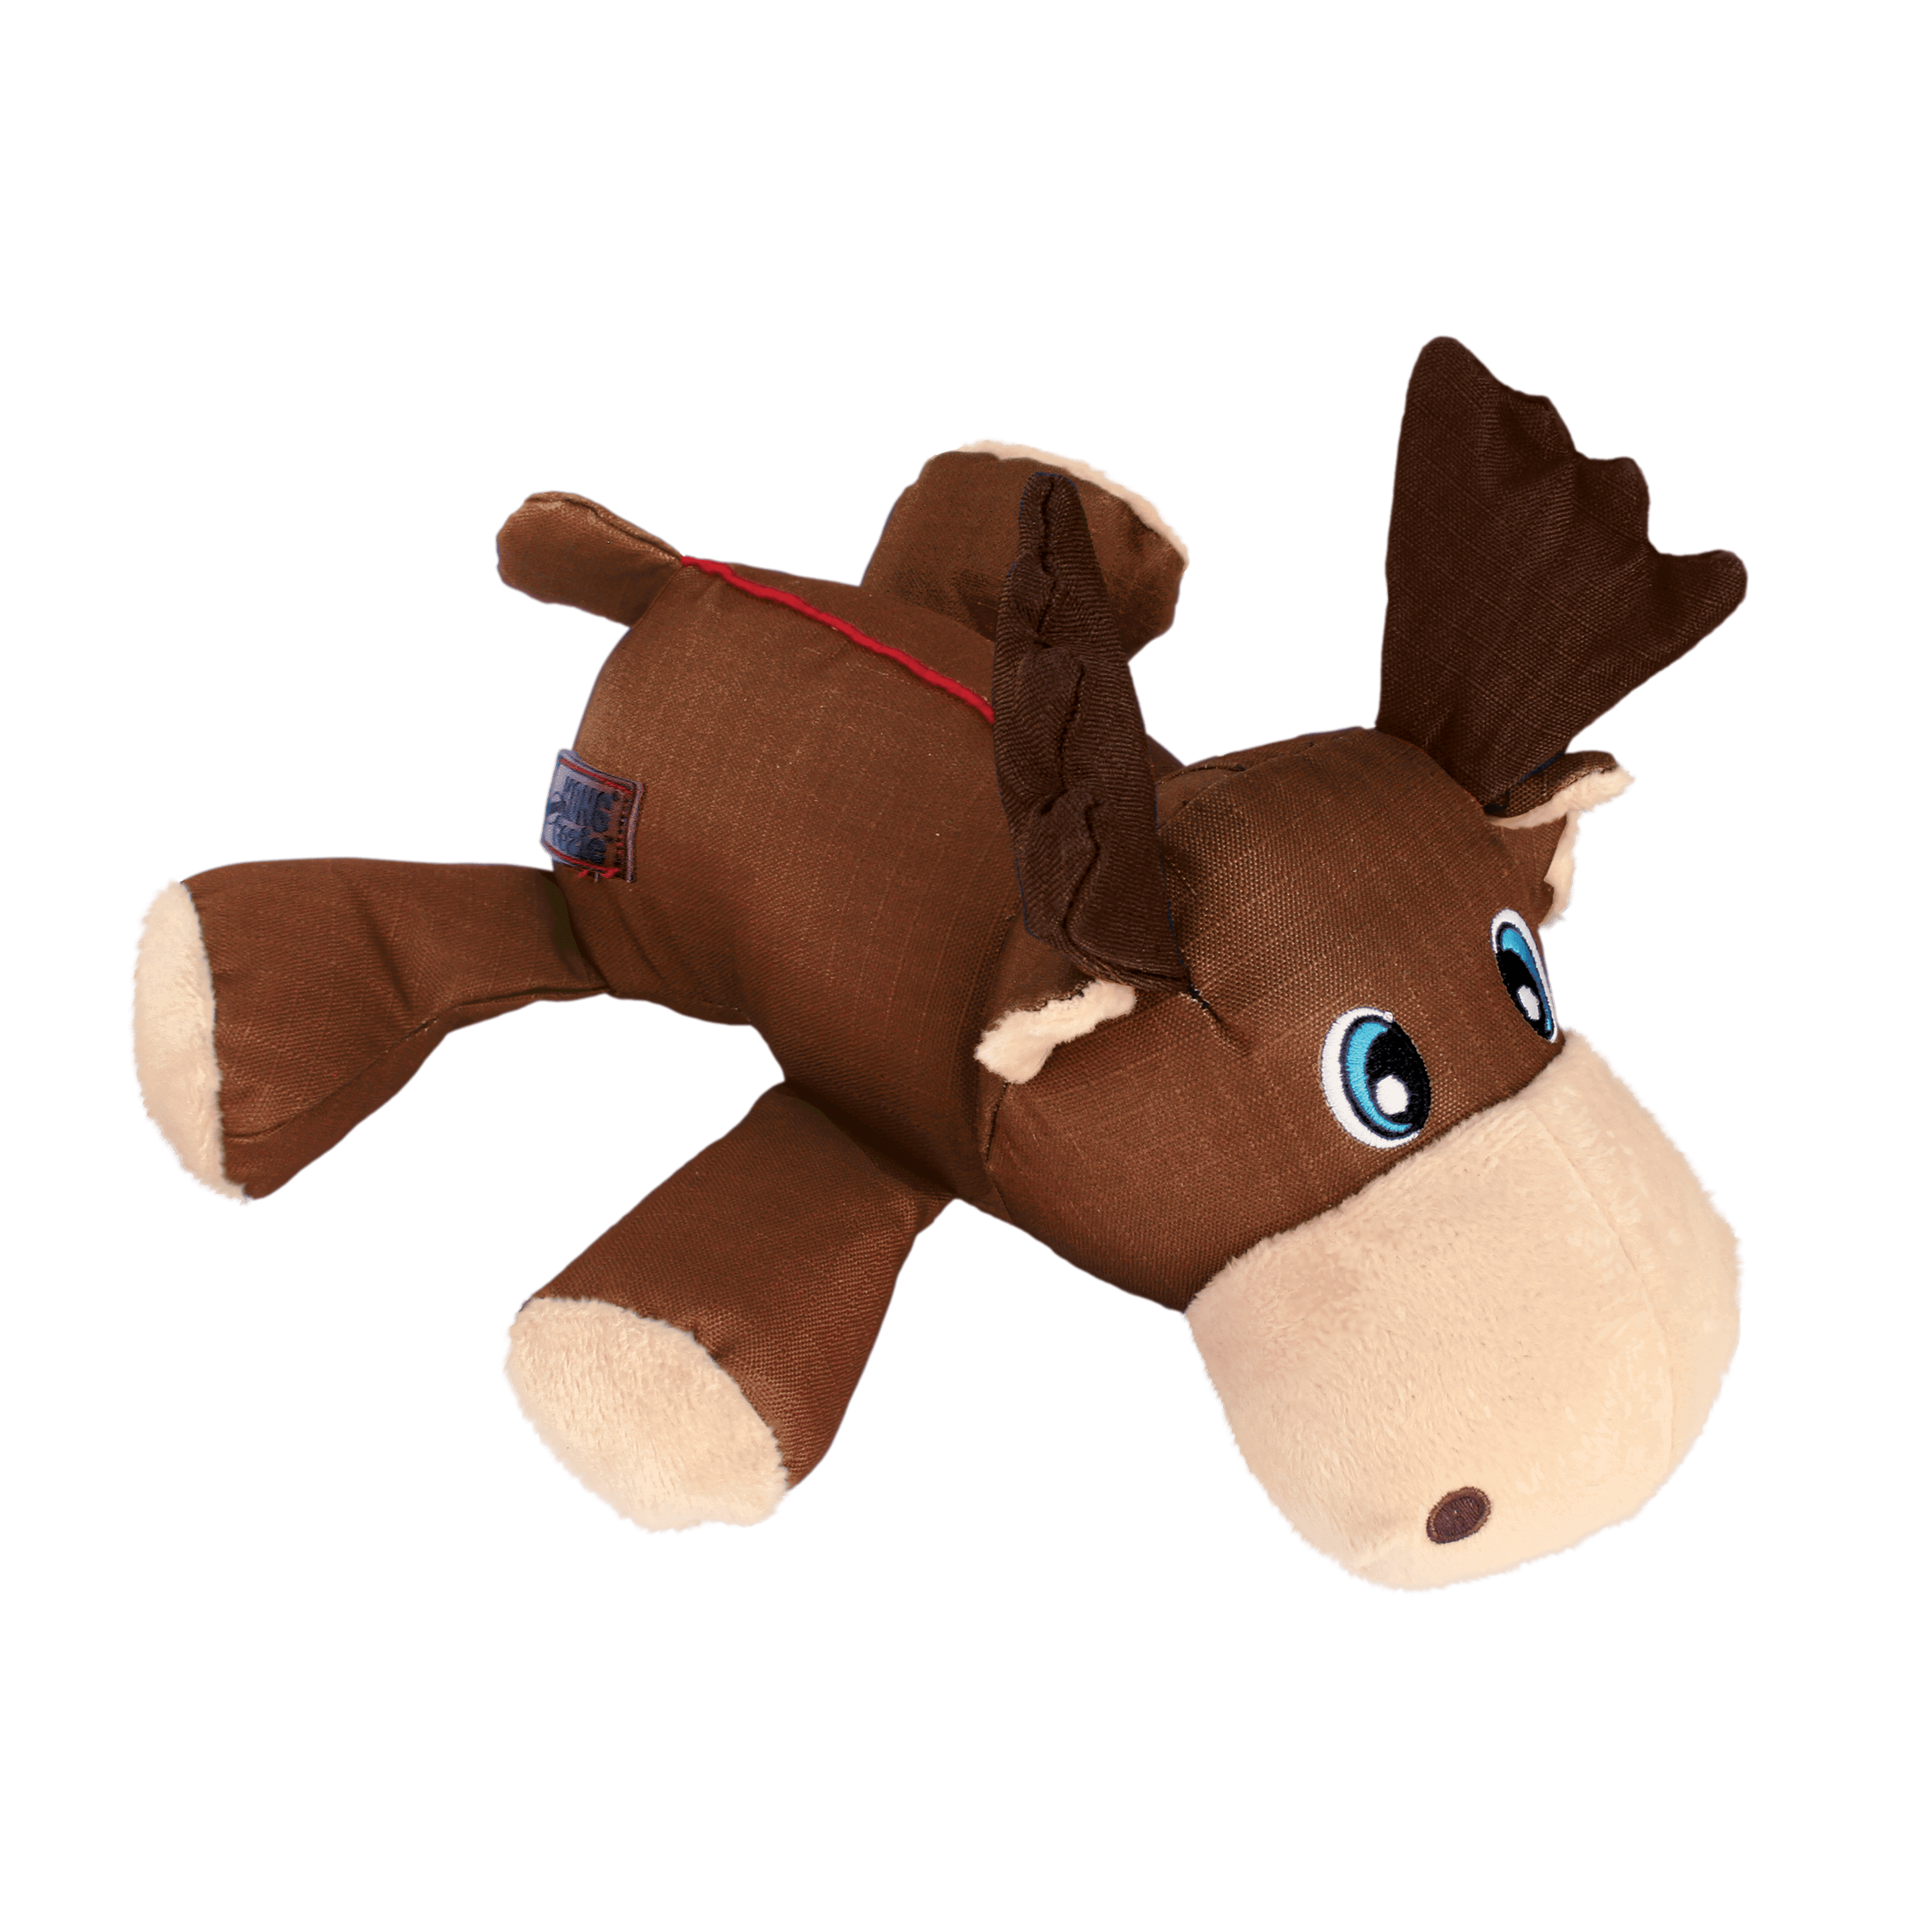 KONG | Cozie Ultra Max Moose | Dog Toy